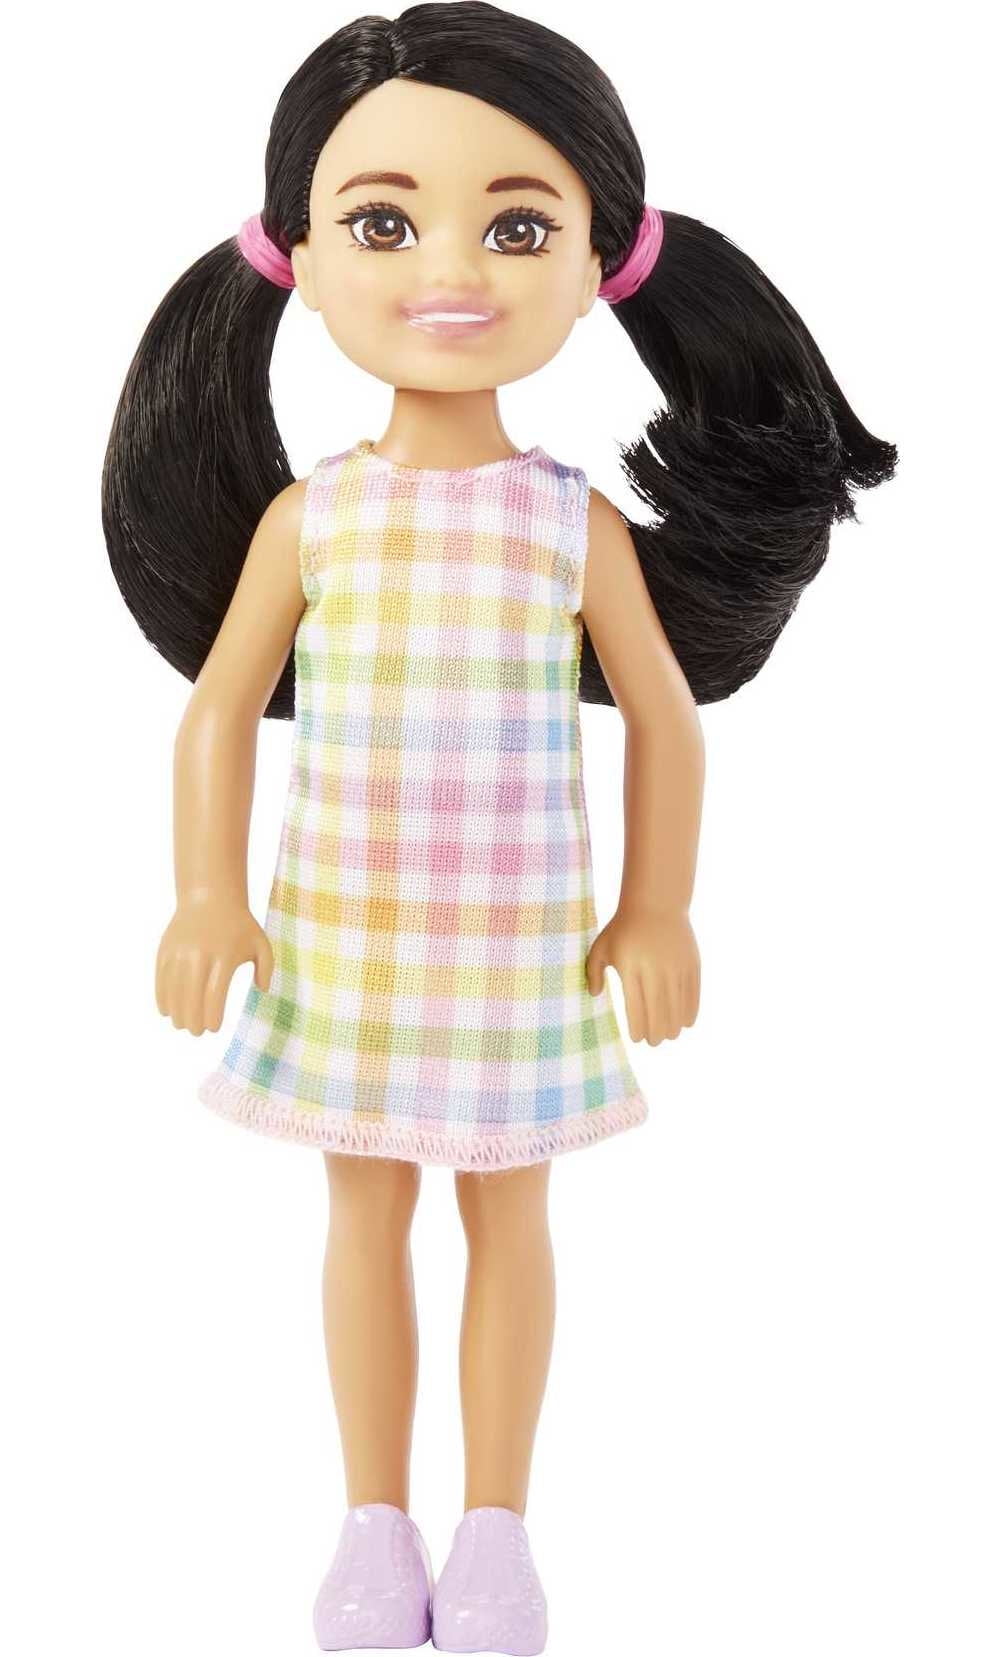 Barbie Chelsea Doll, Small Doll with Black Hair in Pigtails